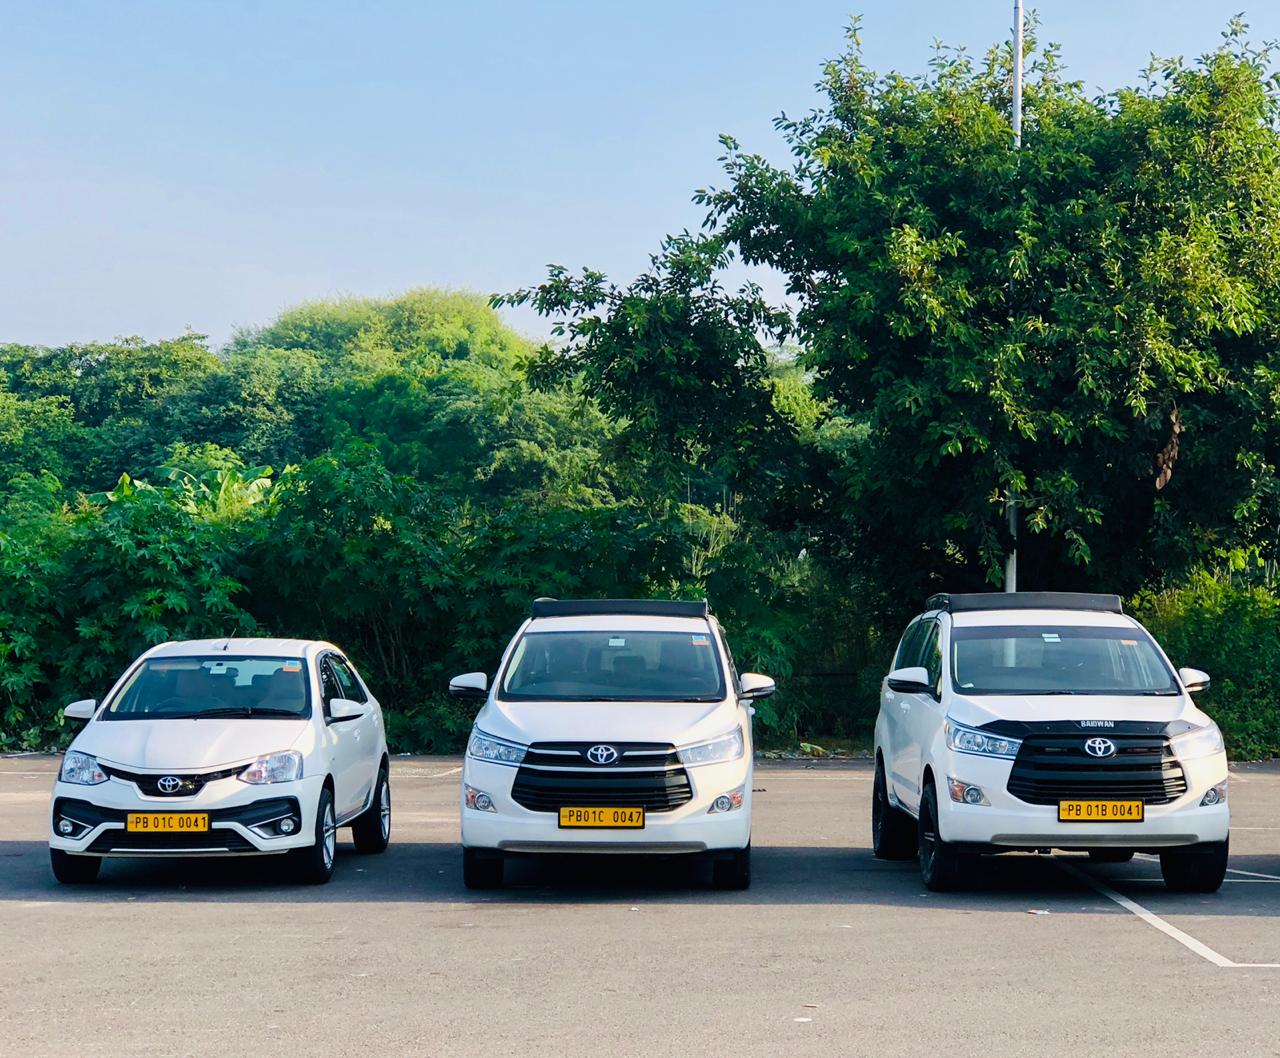 Baidwan Taxi Service, Taxi service in Chandigarh-out station taxi service 